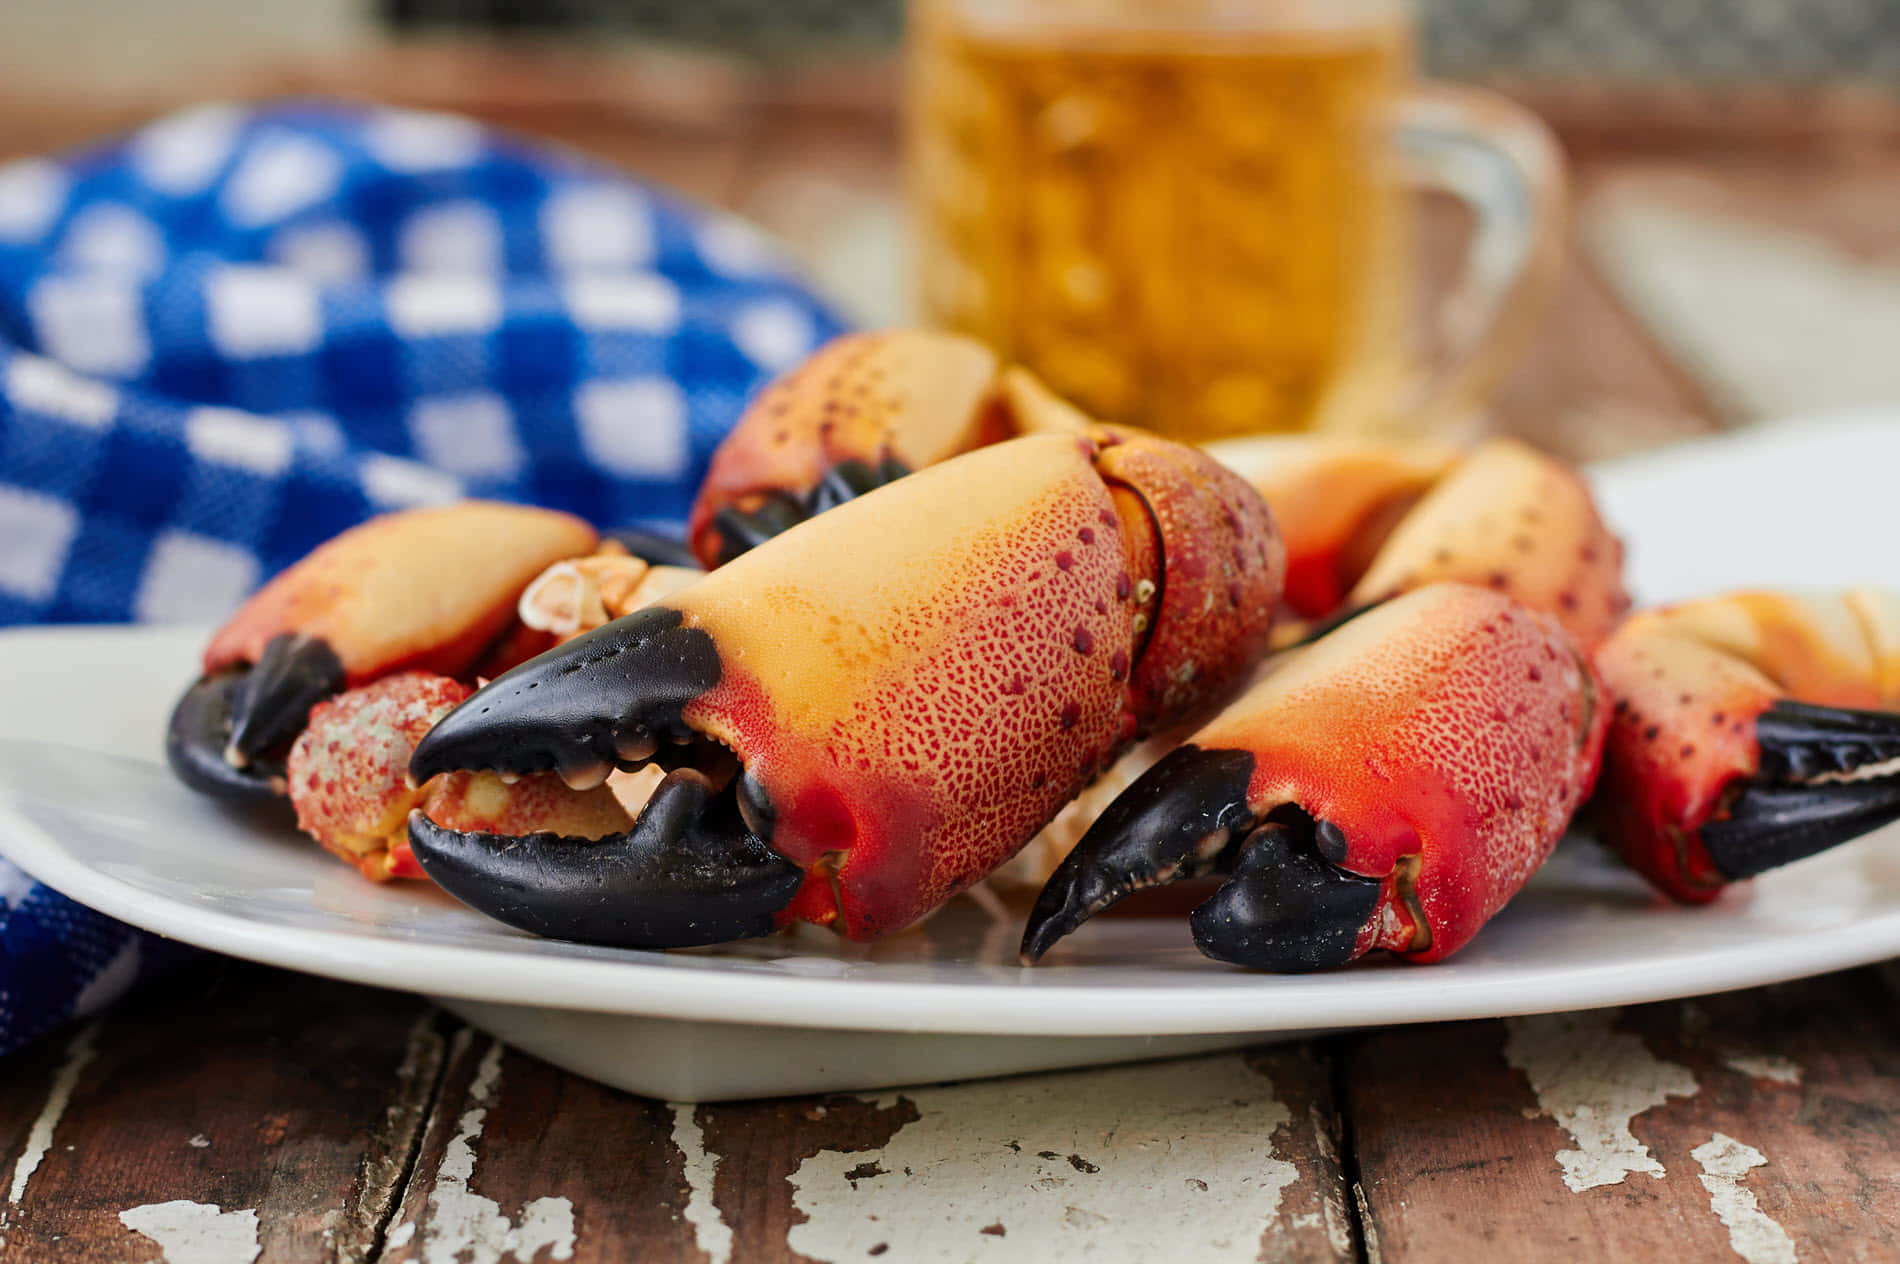 Stone Crab Claws Plated With Beer Wallpaper